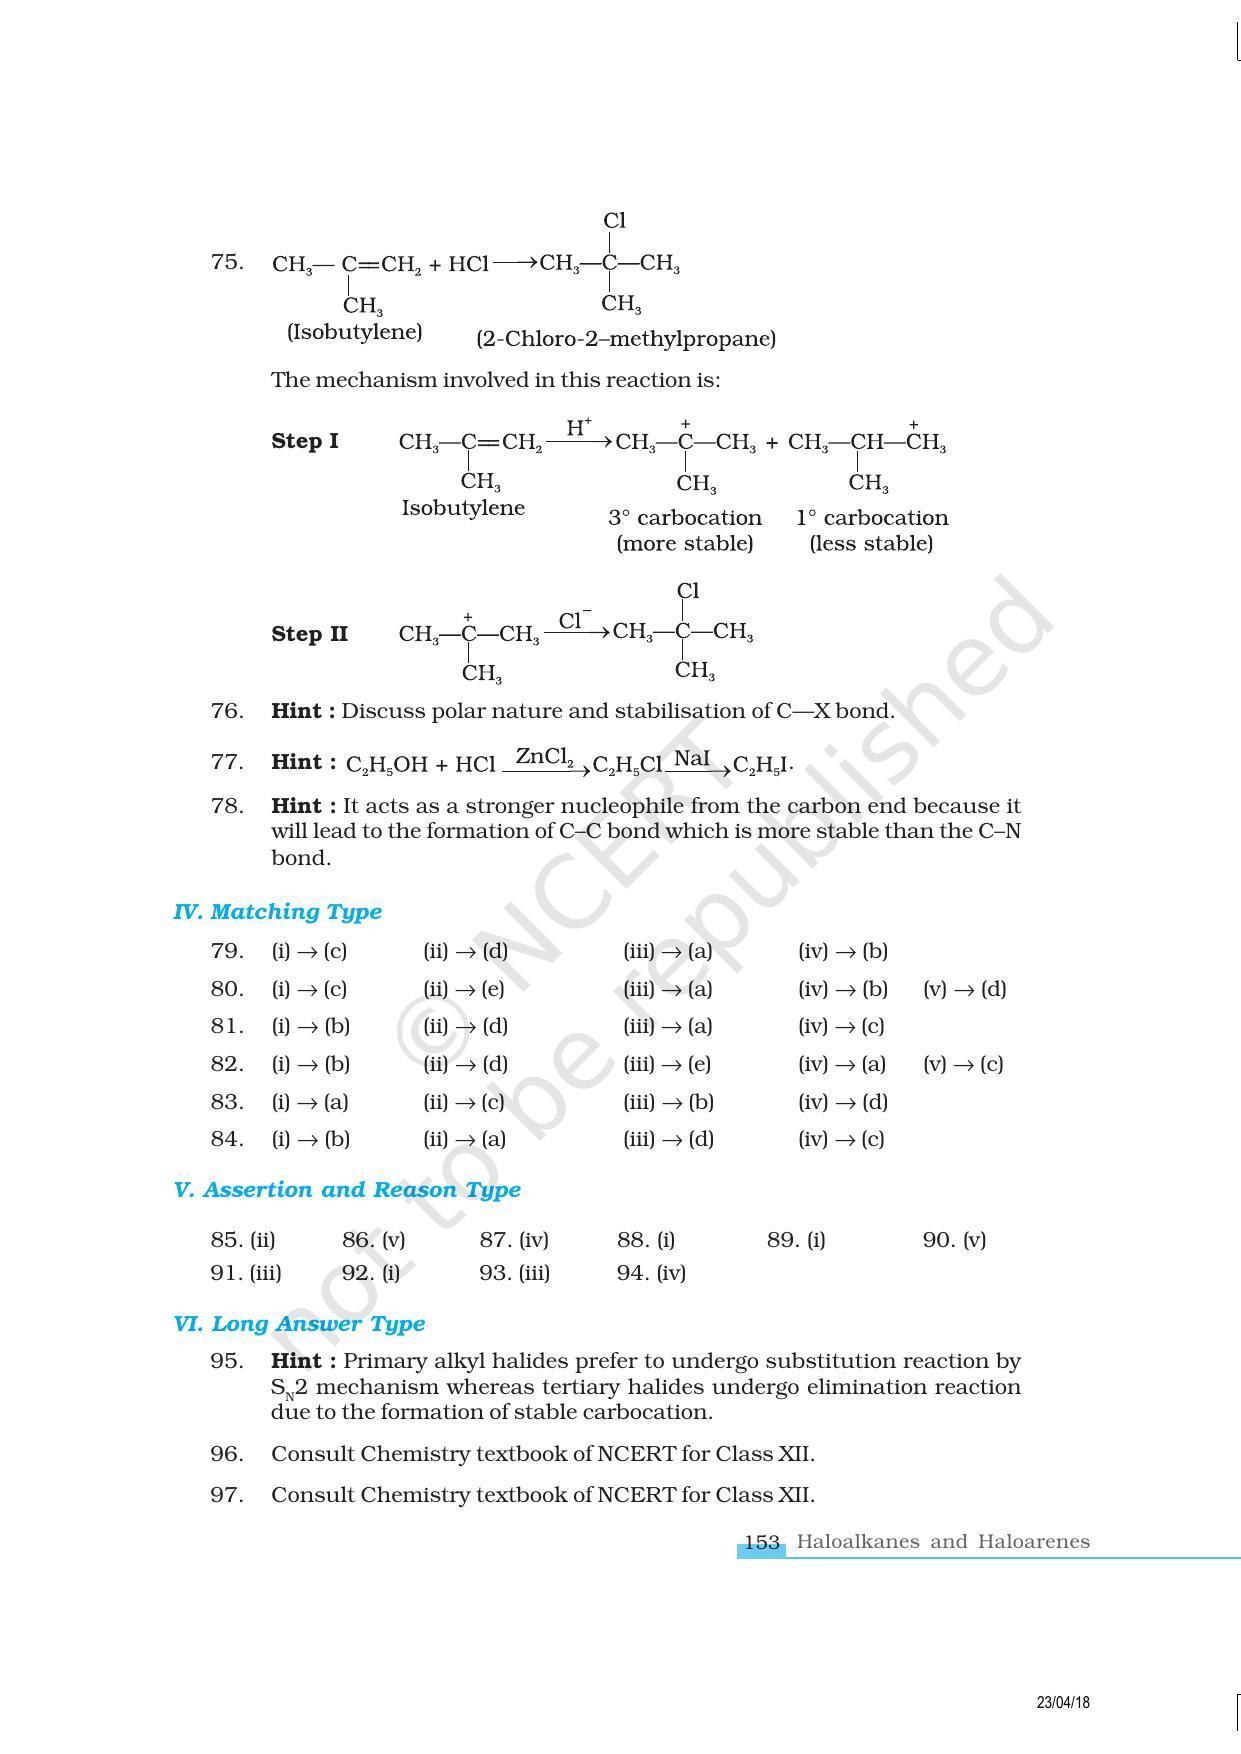 NCERT Exemplar Book for Class 12 Chemistry: Chapter 10 Haloalkanes and Haloarenes - Page 21